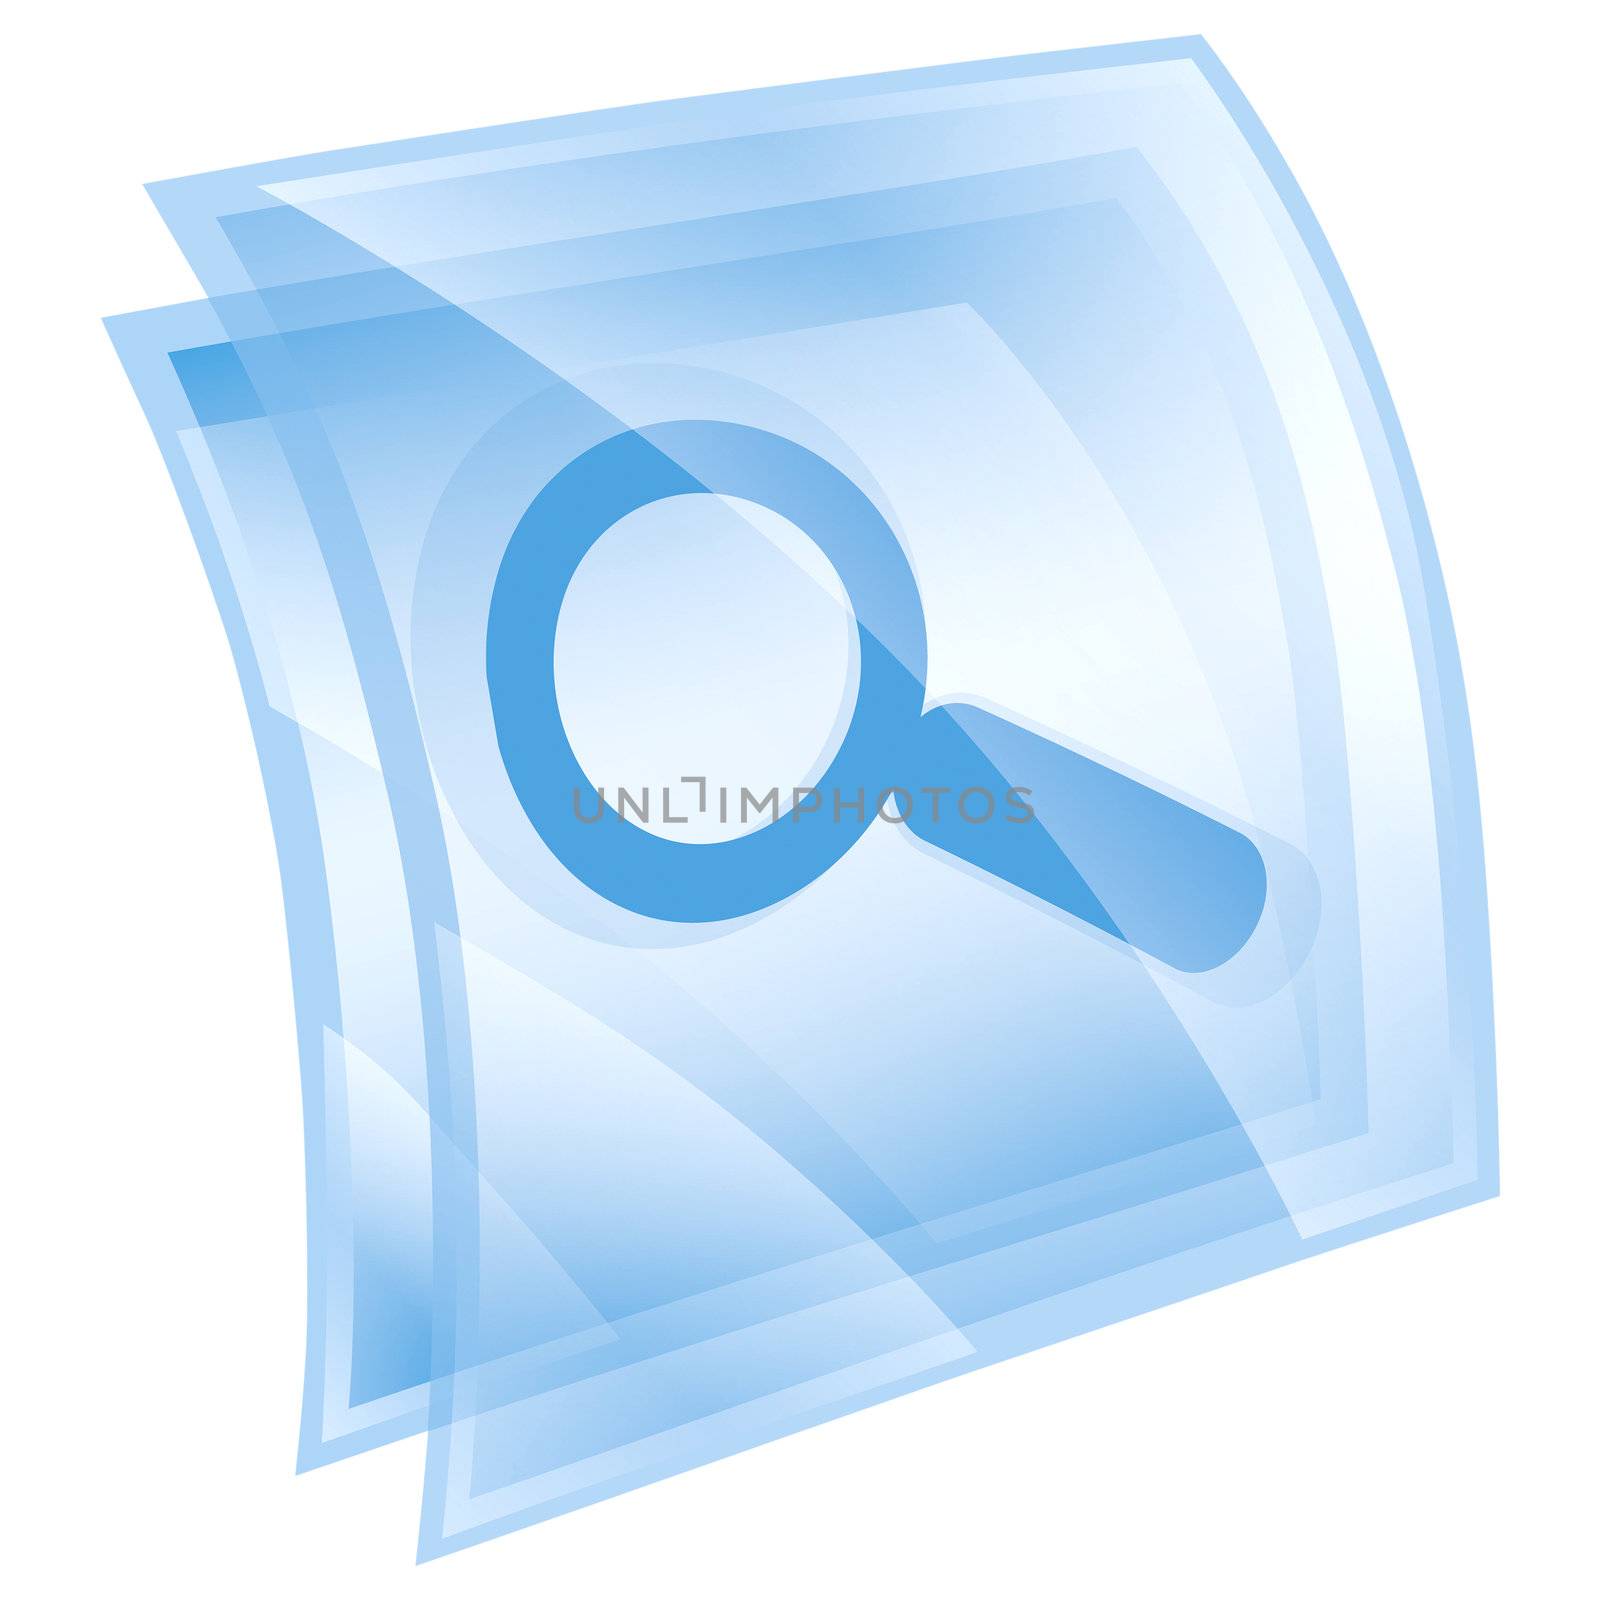 magnifier icon blue square, isolated on white background. by zeffss